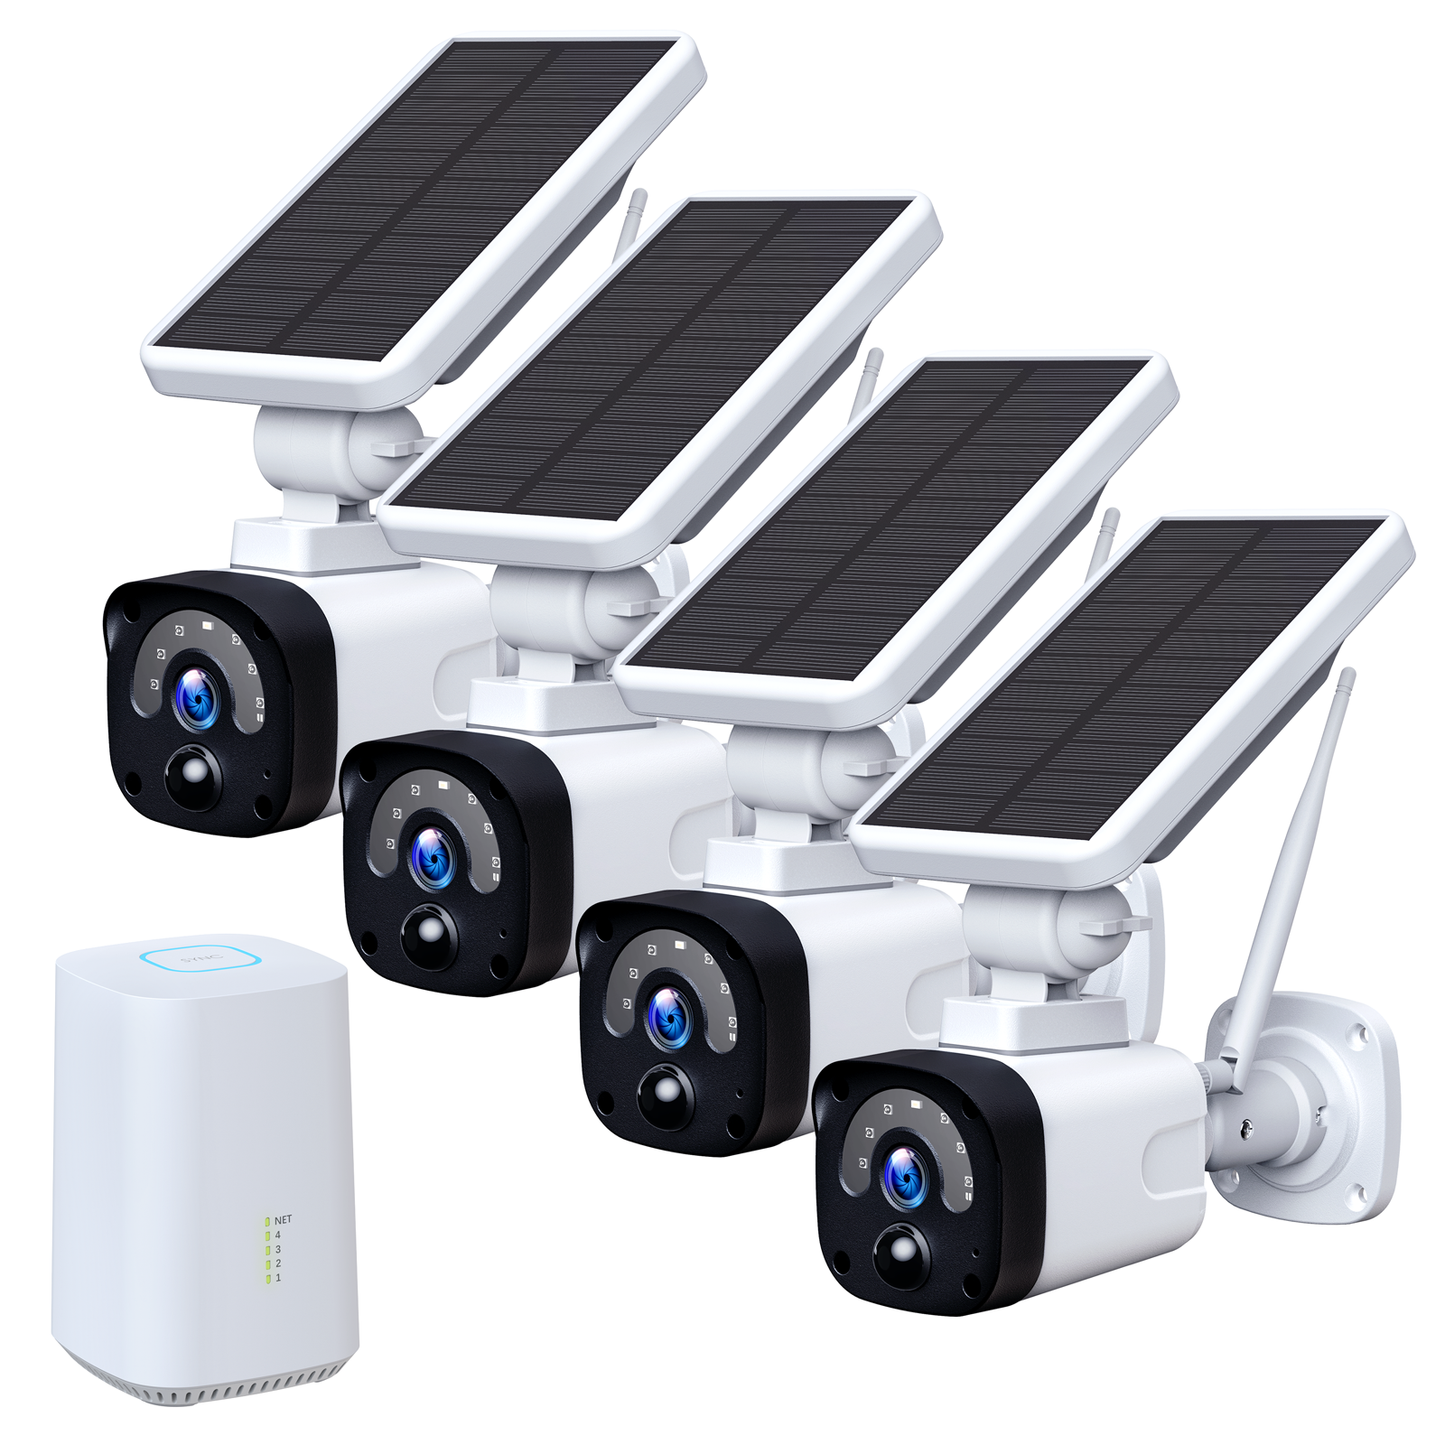 TOGUARD 3MP Solar Security Camera System with Base Station, 2-Way Audio PIR Motion Detection Night Vision Support TF/Cloud Storage HDMI Output